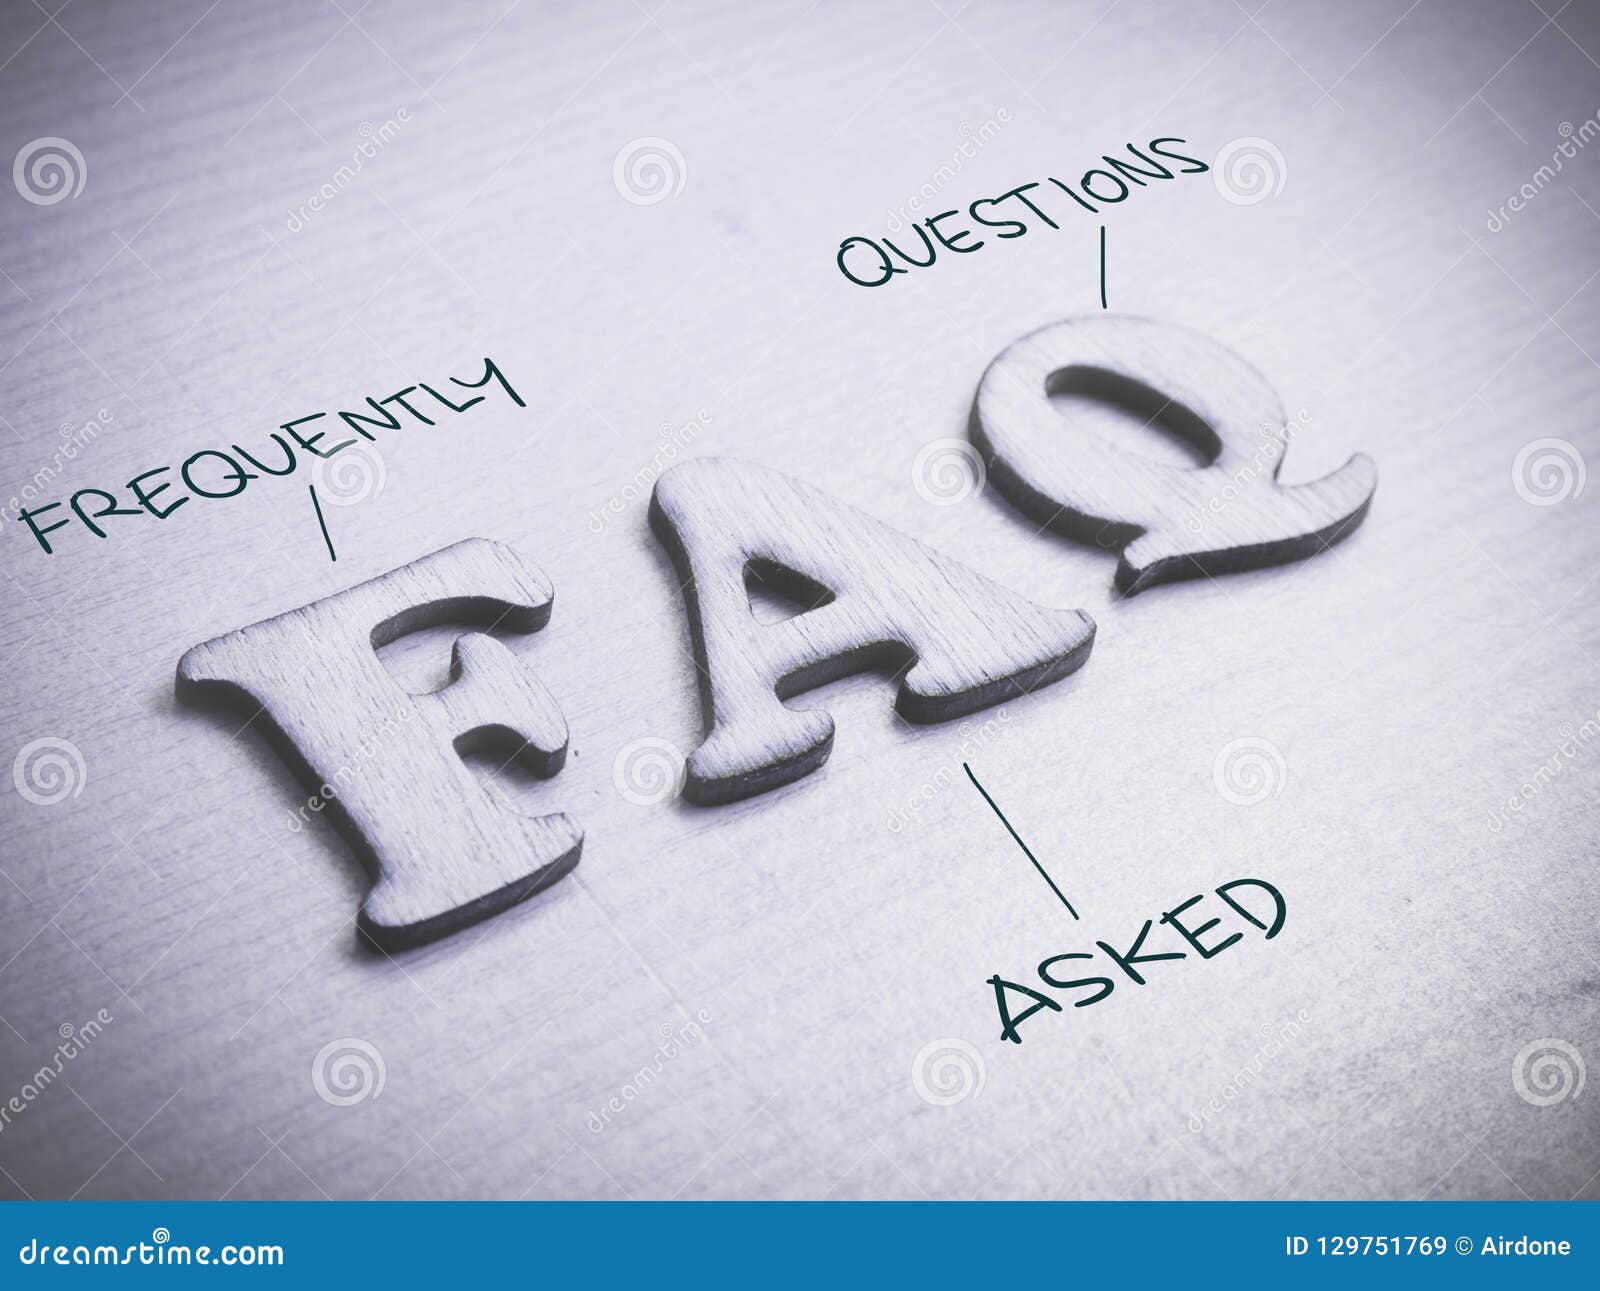 faq, frequently asked questions. words typography concept